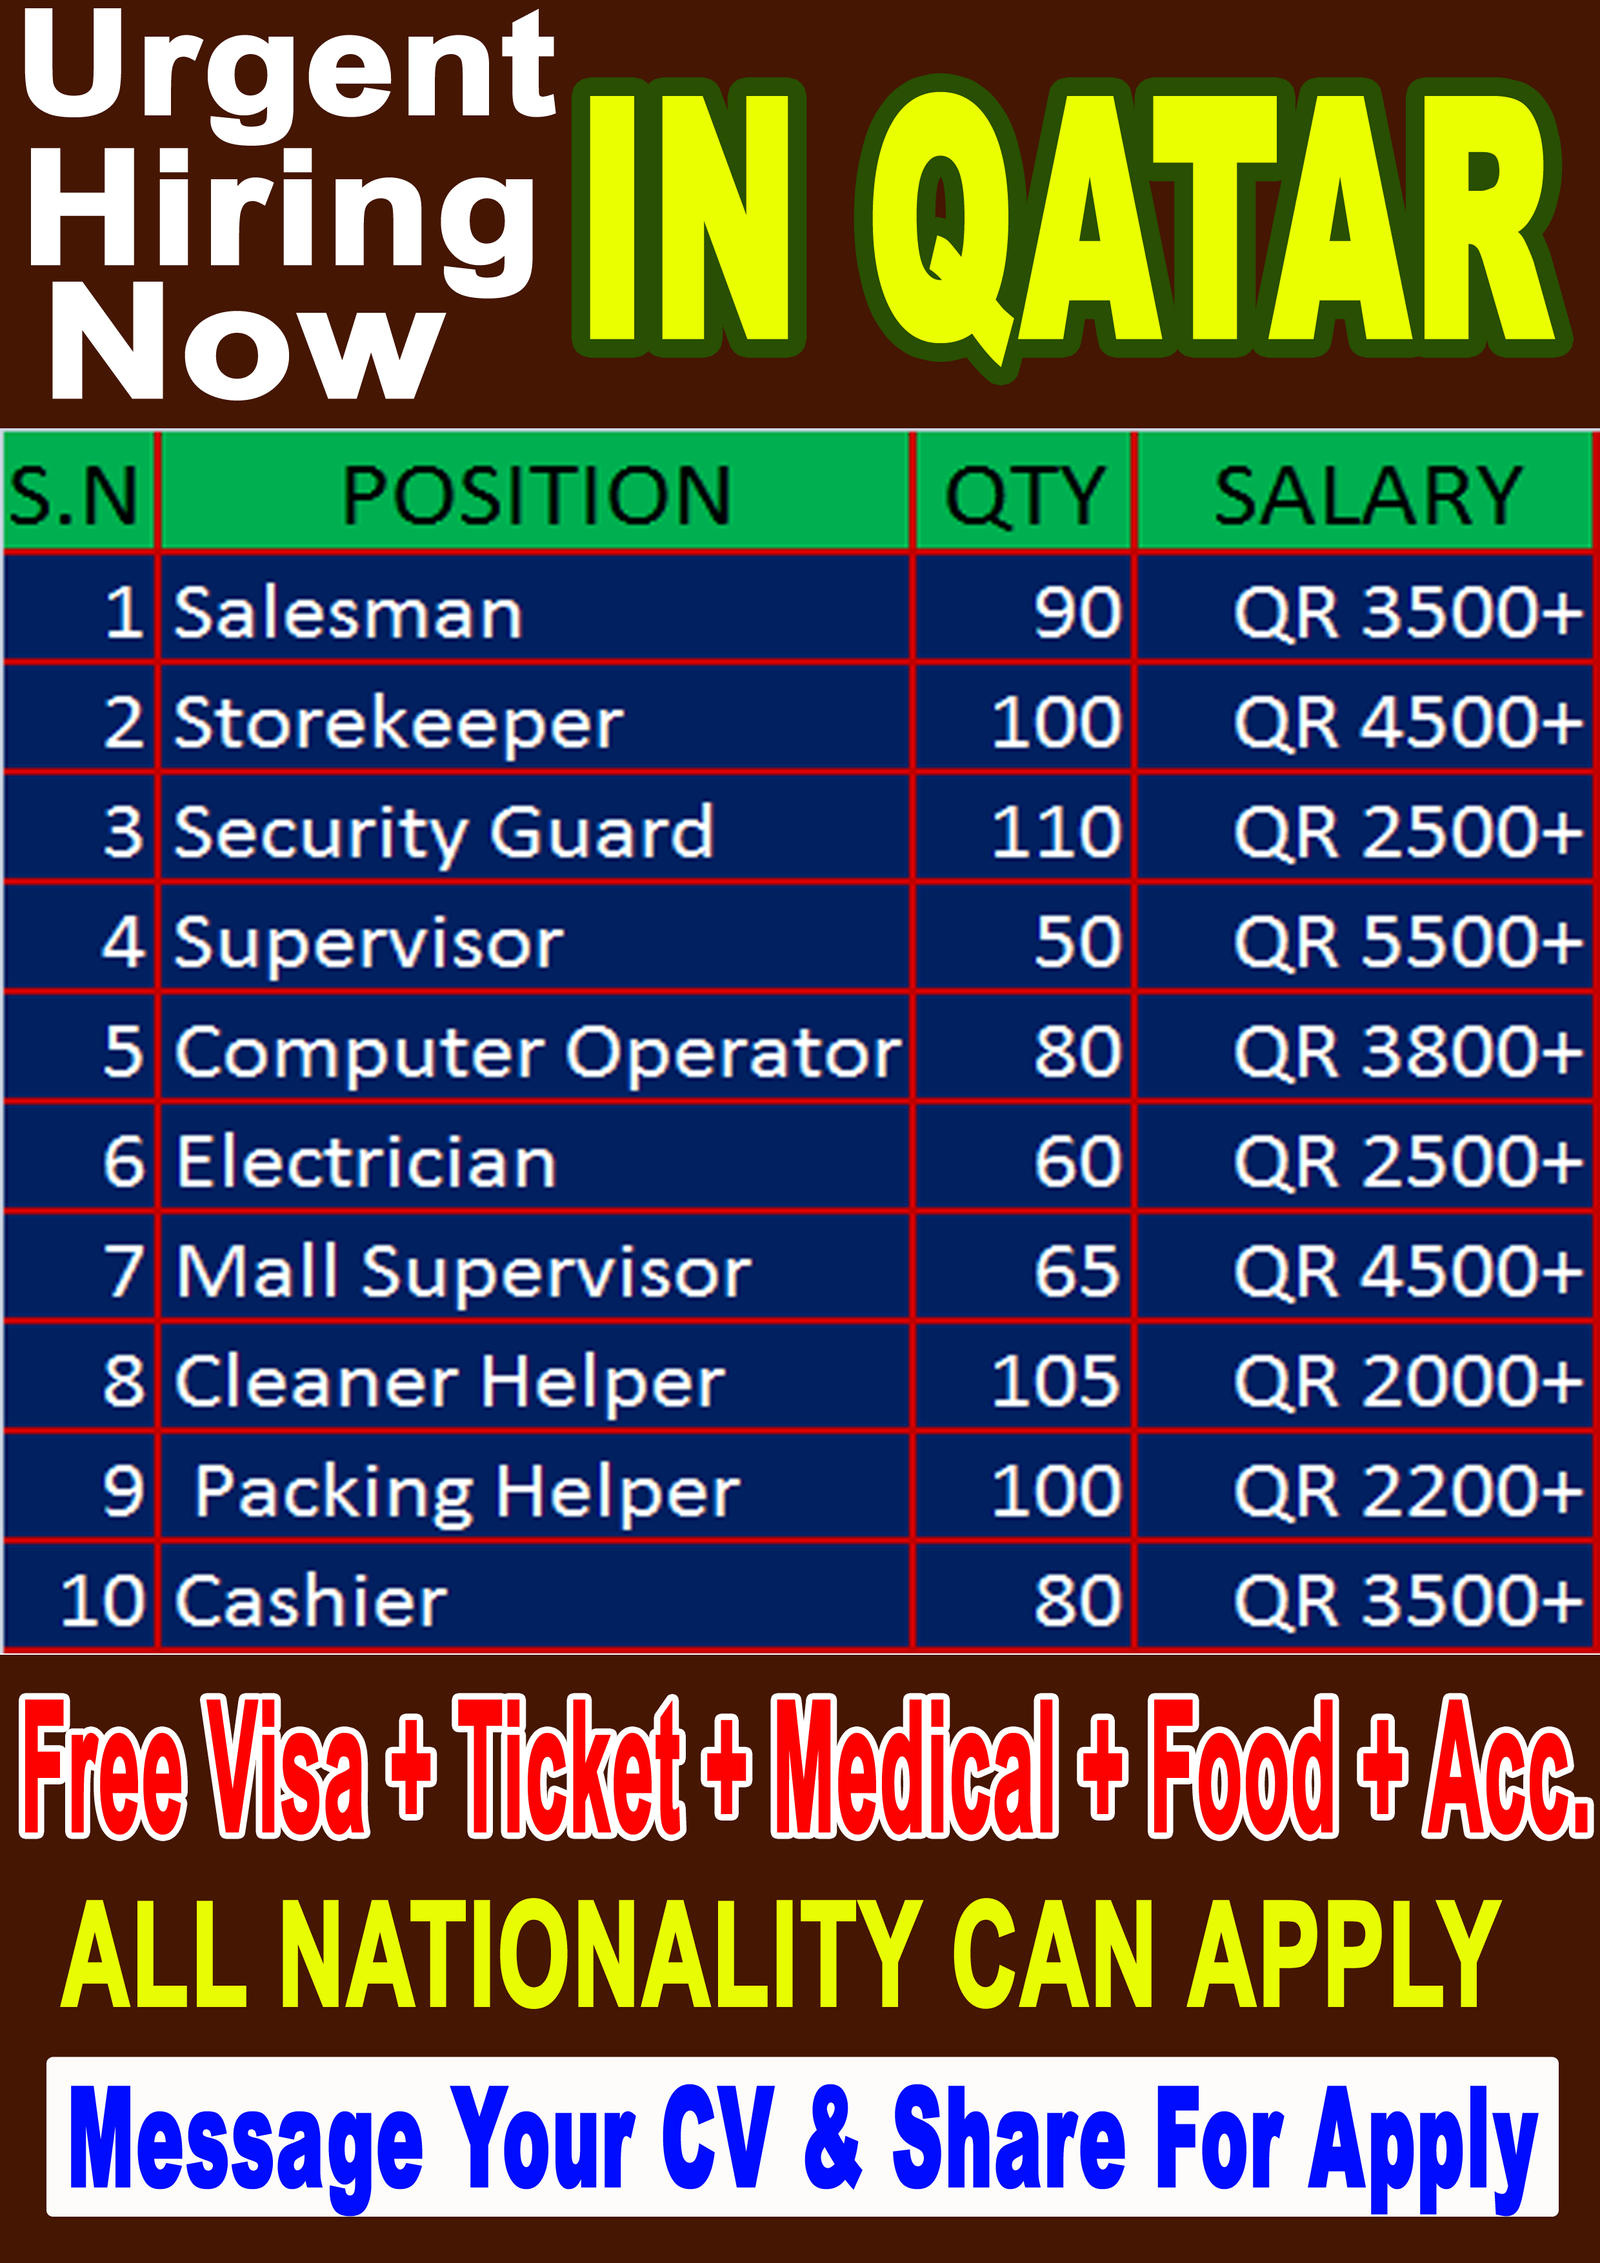 Vacancy Open In Qatar for verious country anyone can apply